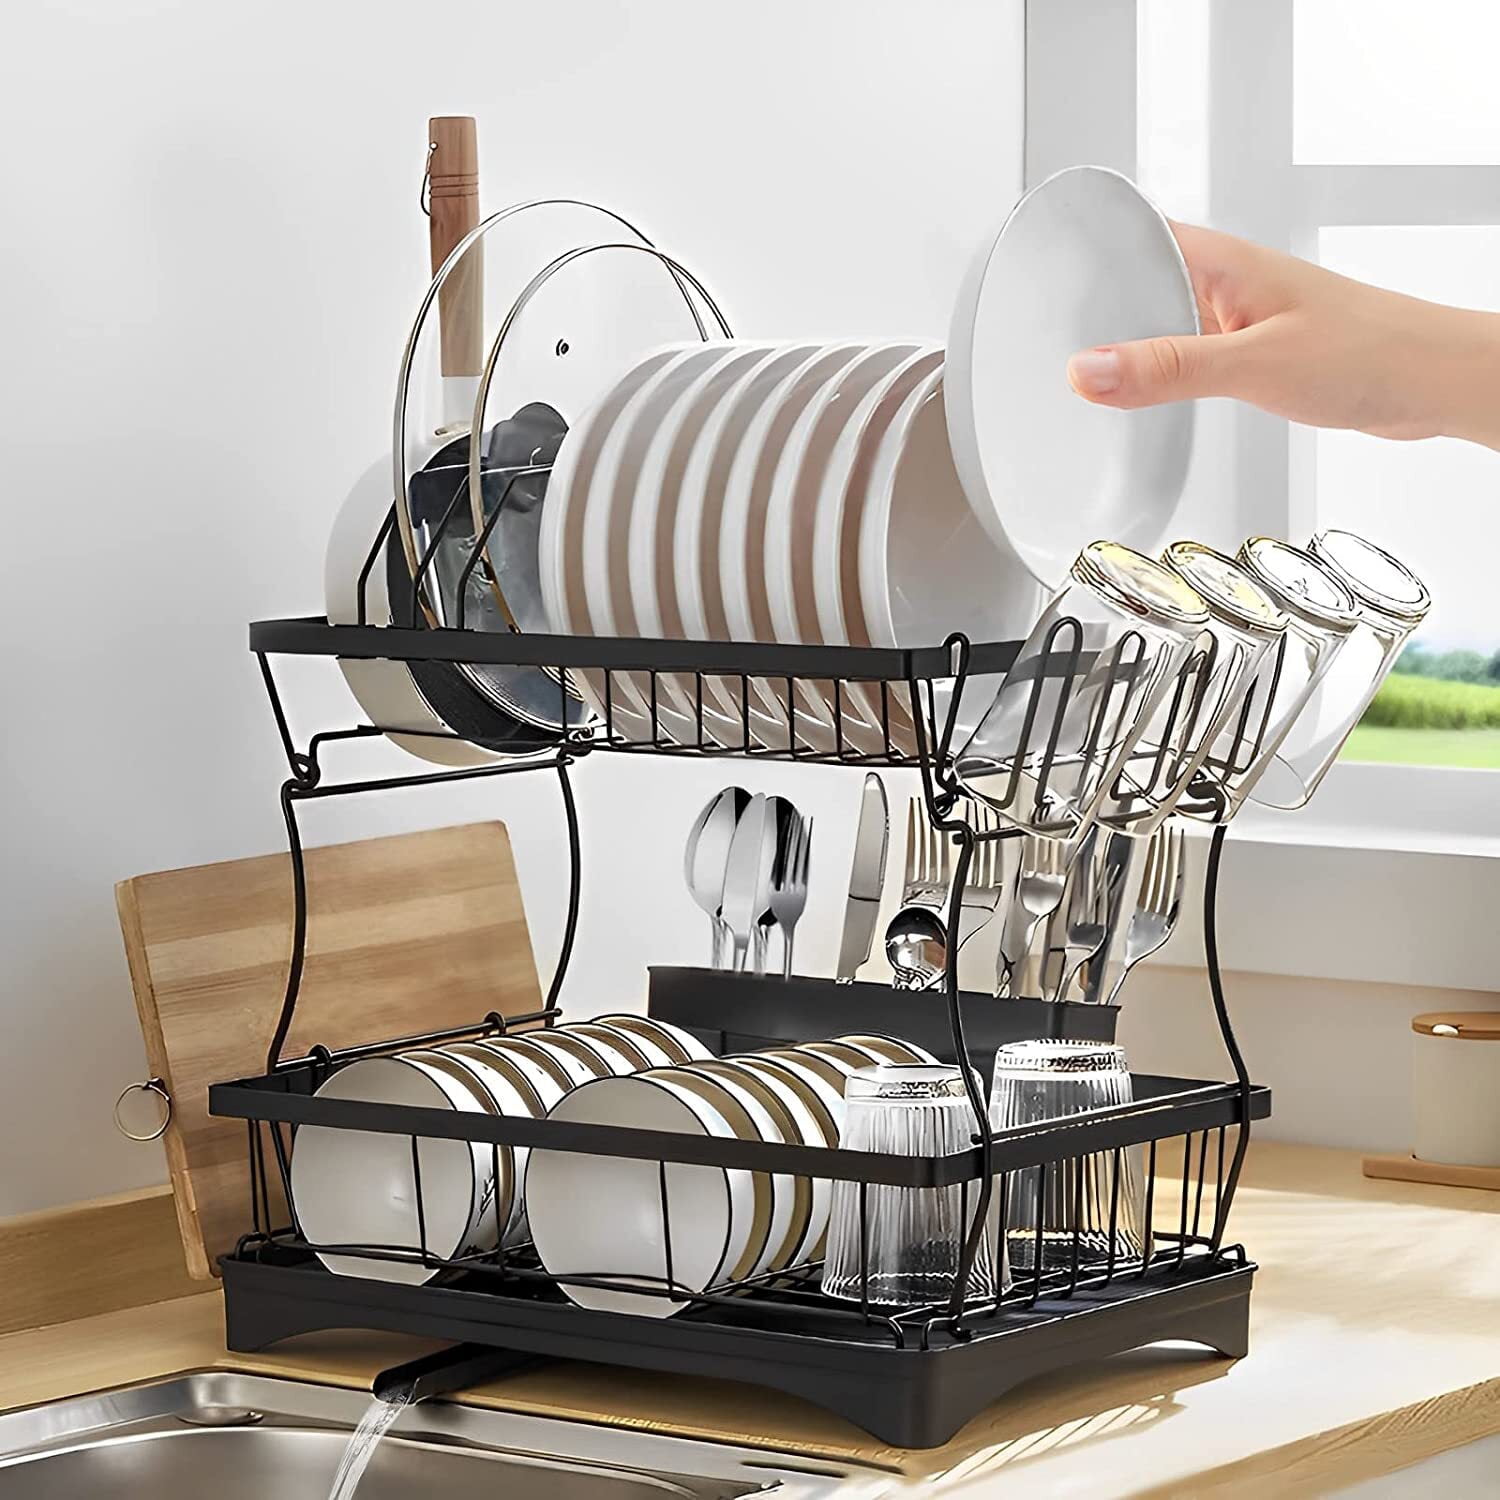 Wahopy Heavy Duty 2 Tier Dish Drying Rack with Drainboard for